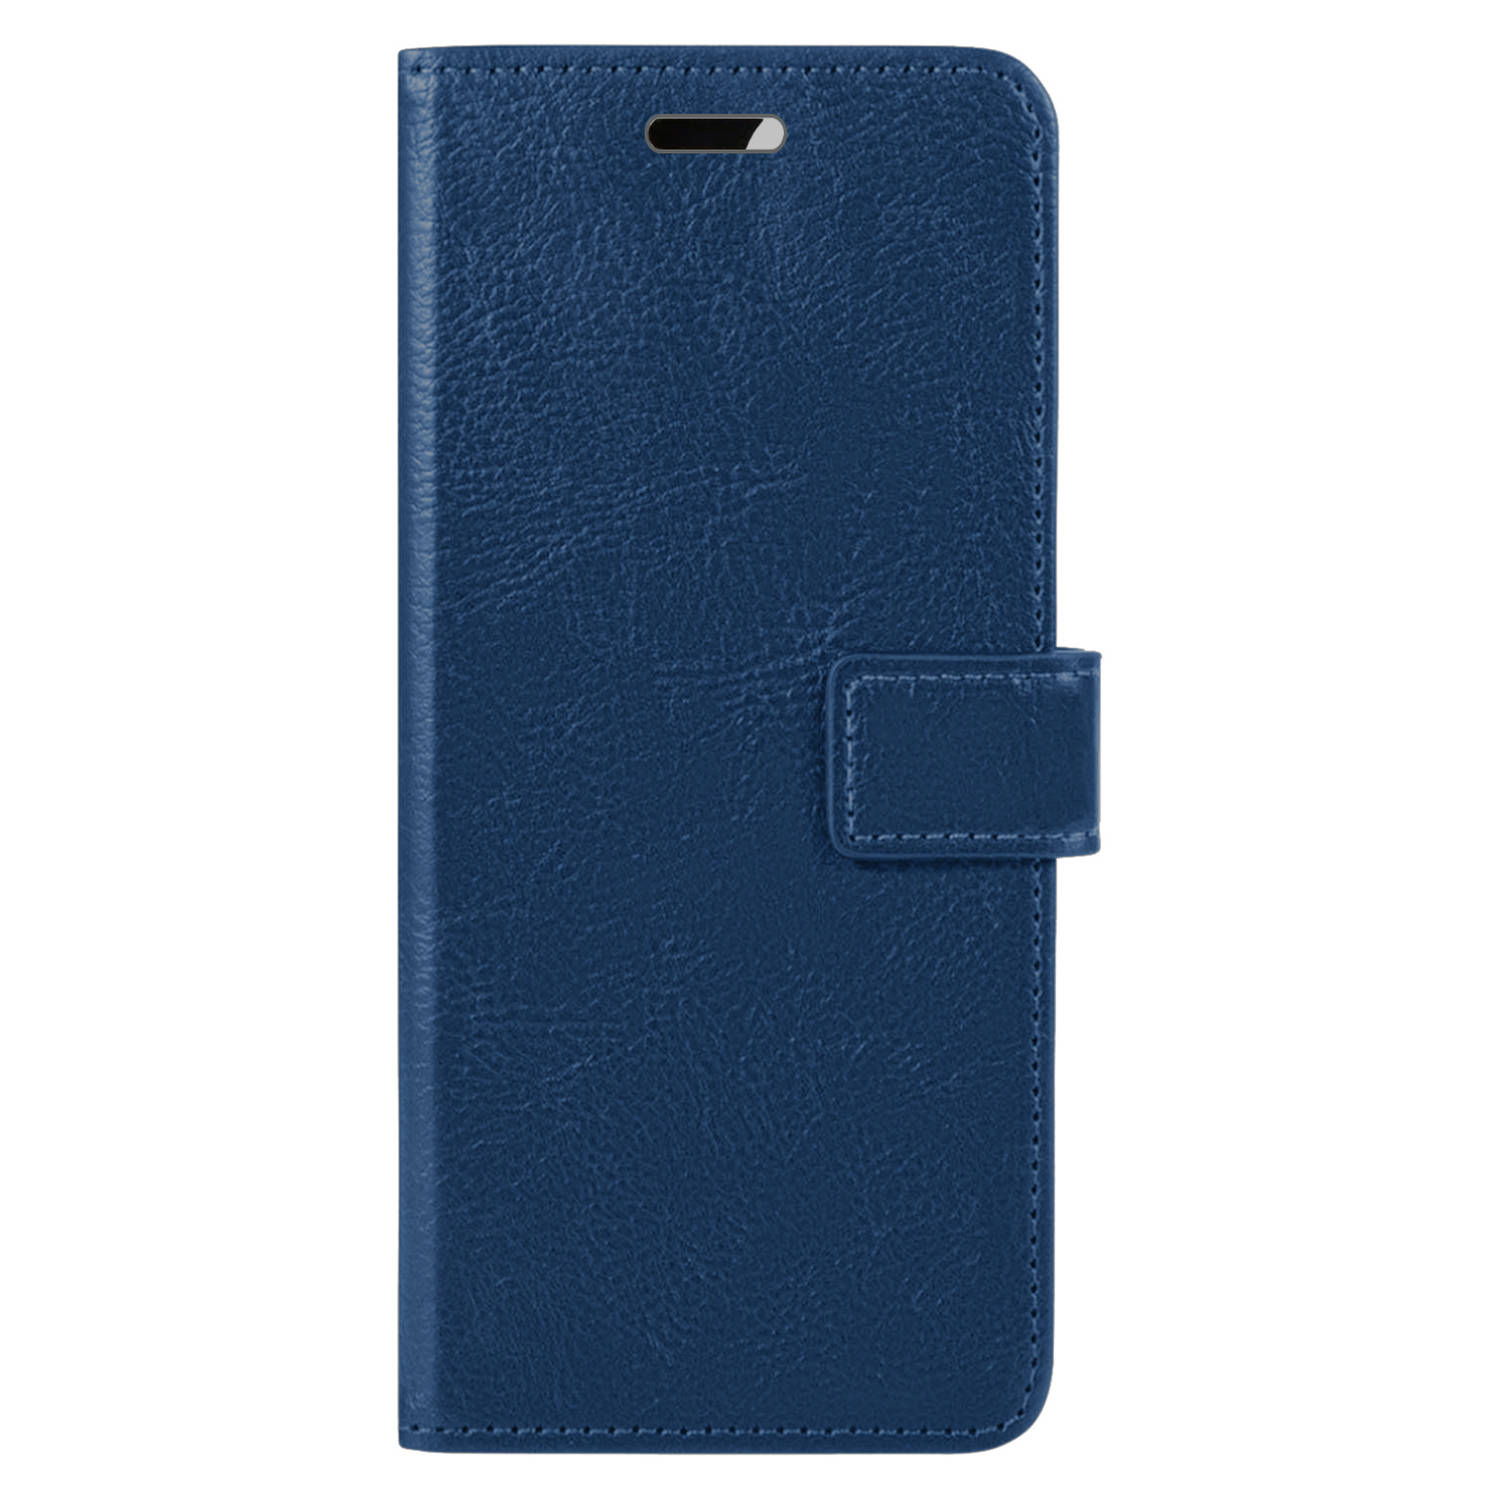 Hoes voor iPhone 13 Mini Hoesje Bookcase Hoes Flip Case Book Cover - Hoes voor iPhone 13 Mini Hoes Book Case Hoesje - Donkerblauw